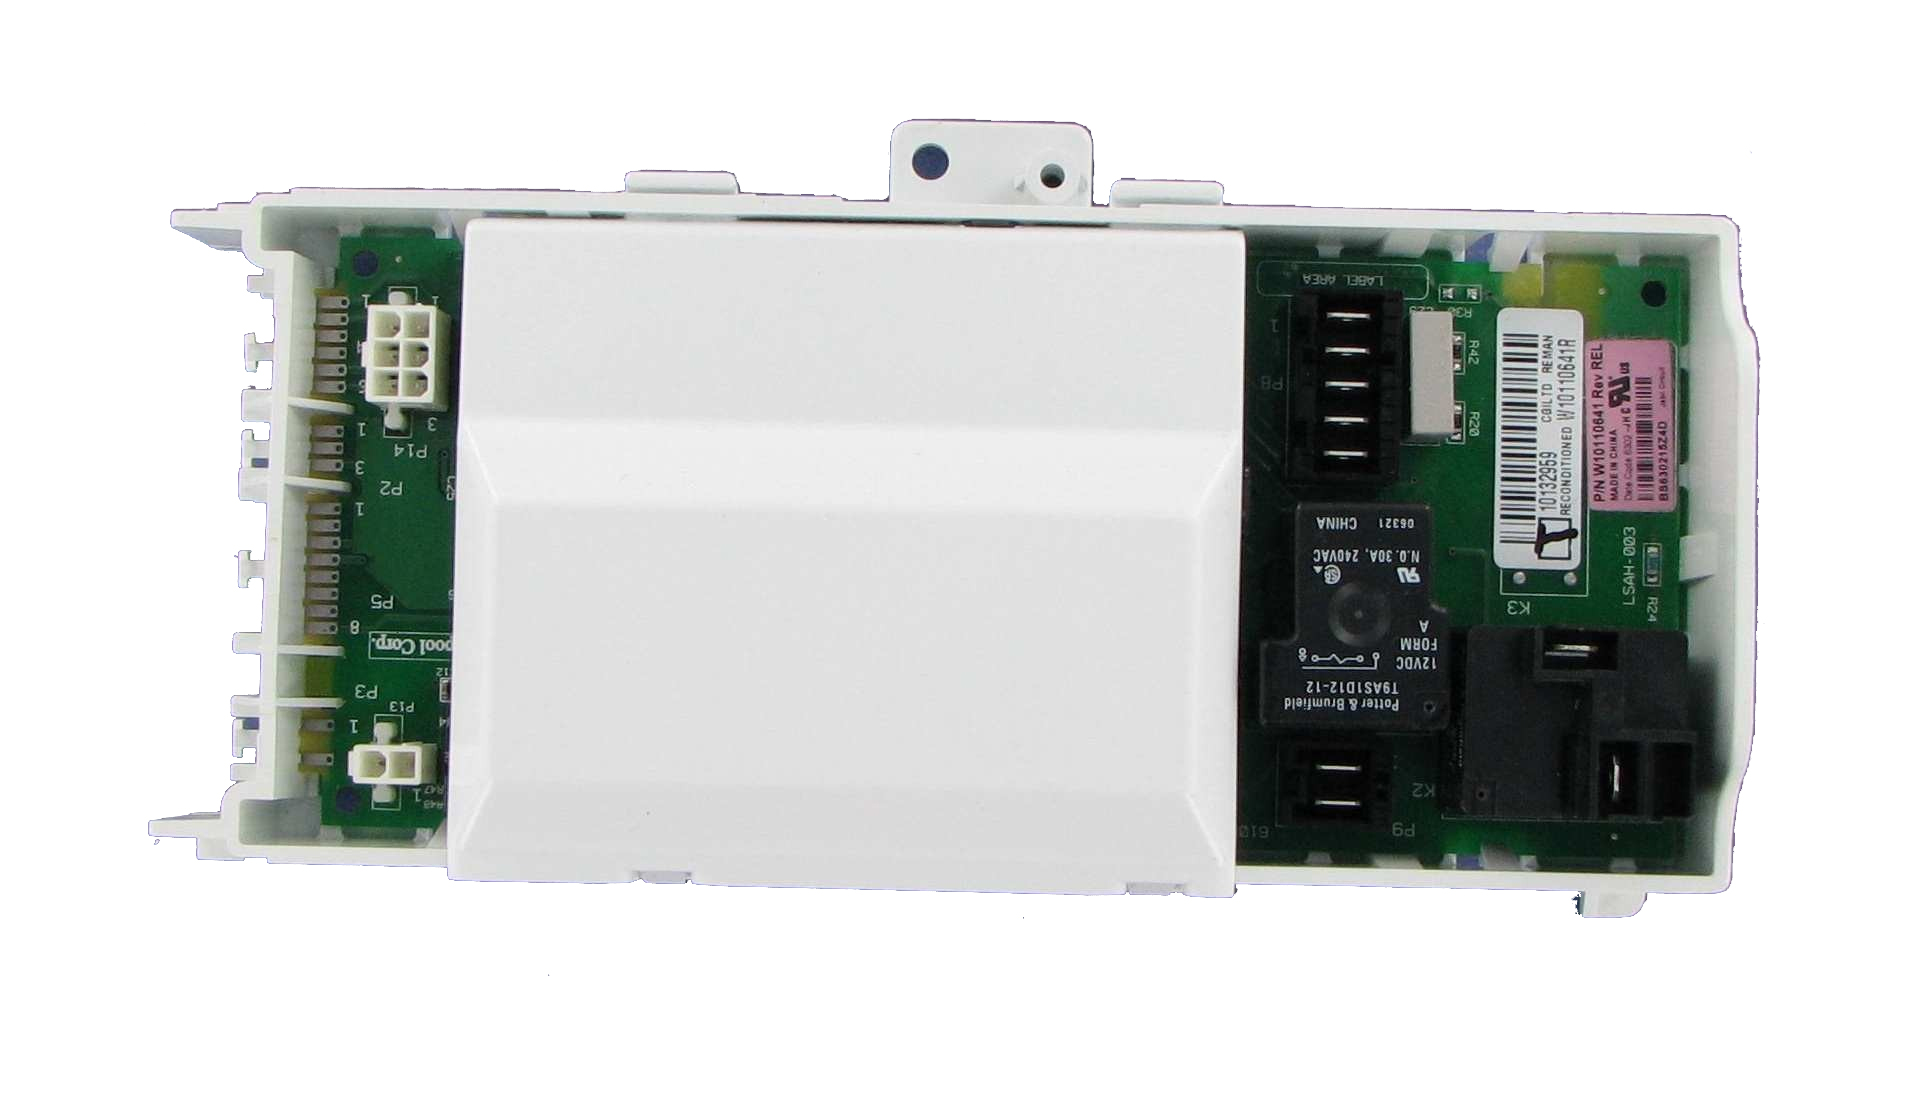 Whirlpool Dryer Main Control Board. Part #WPW10111621 – SEE NOTE